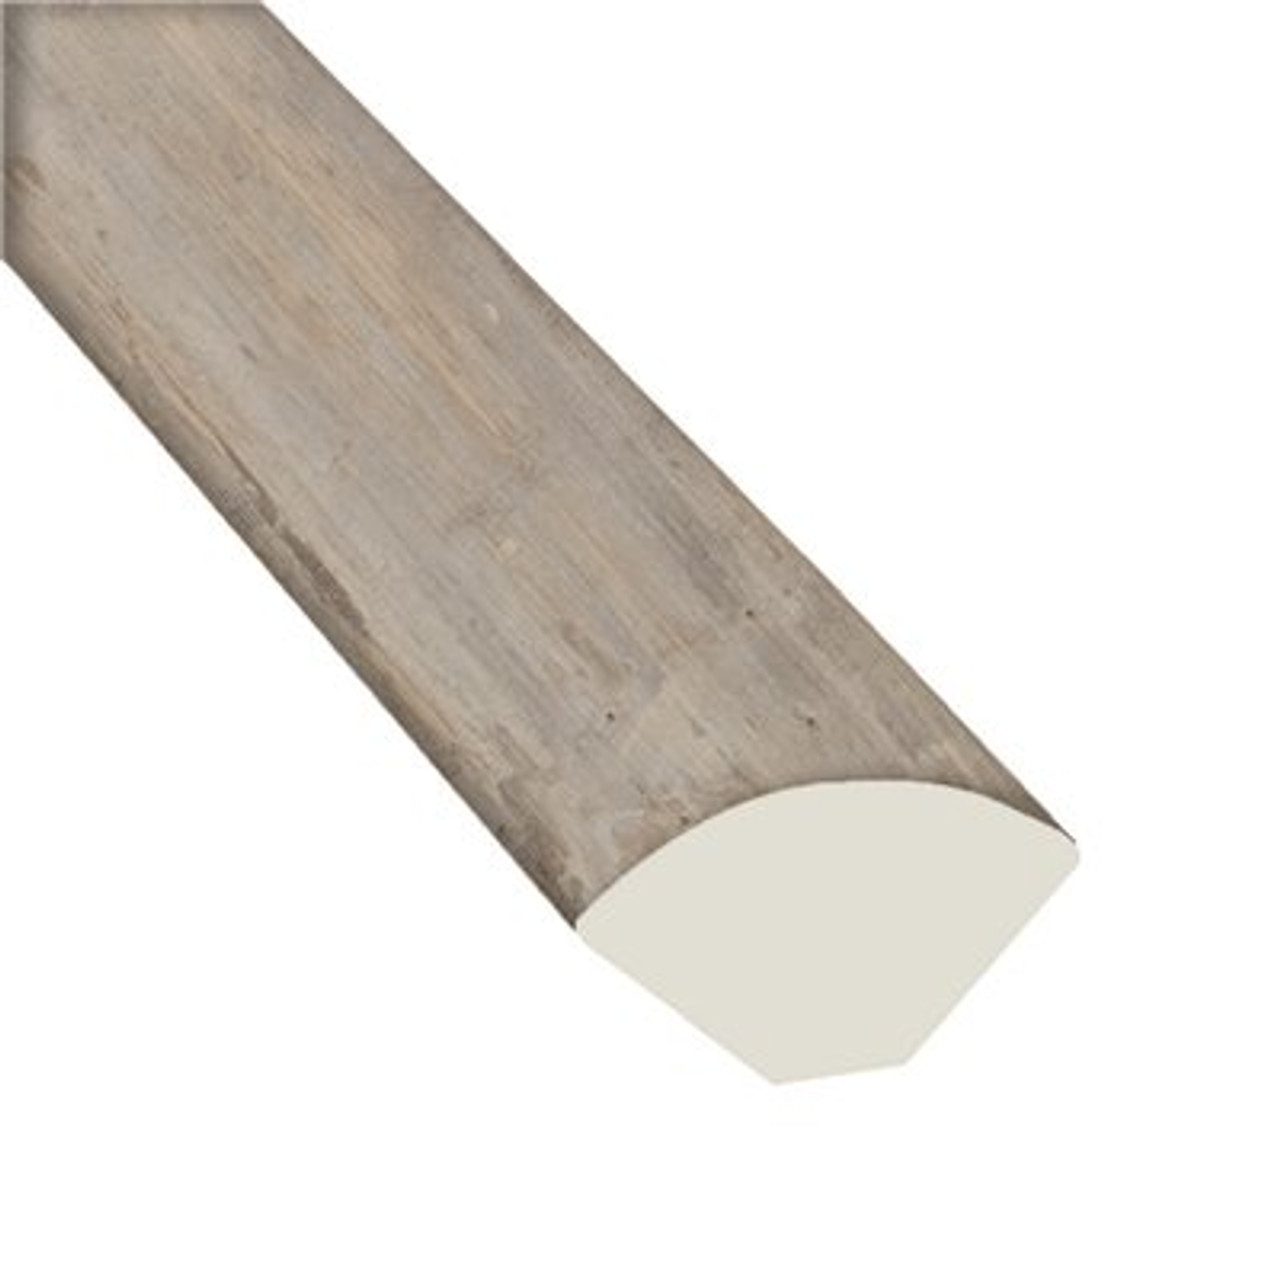 MSI Arch Brooks Maple 2/3 in. Thick x 3/5 in. Wide x 94 in. Length Luxury Vinyl Quarter Round Molding